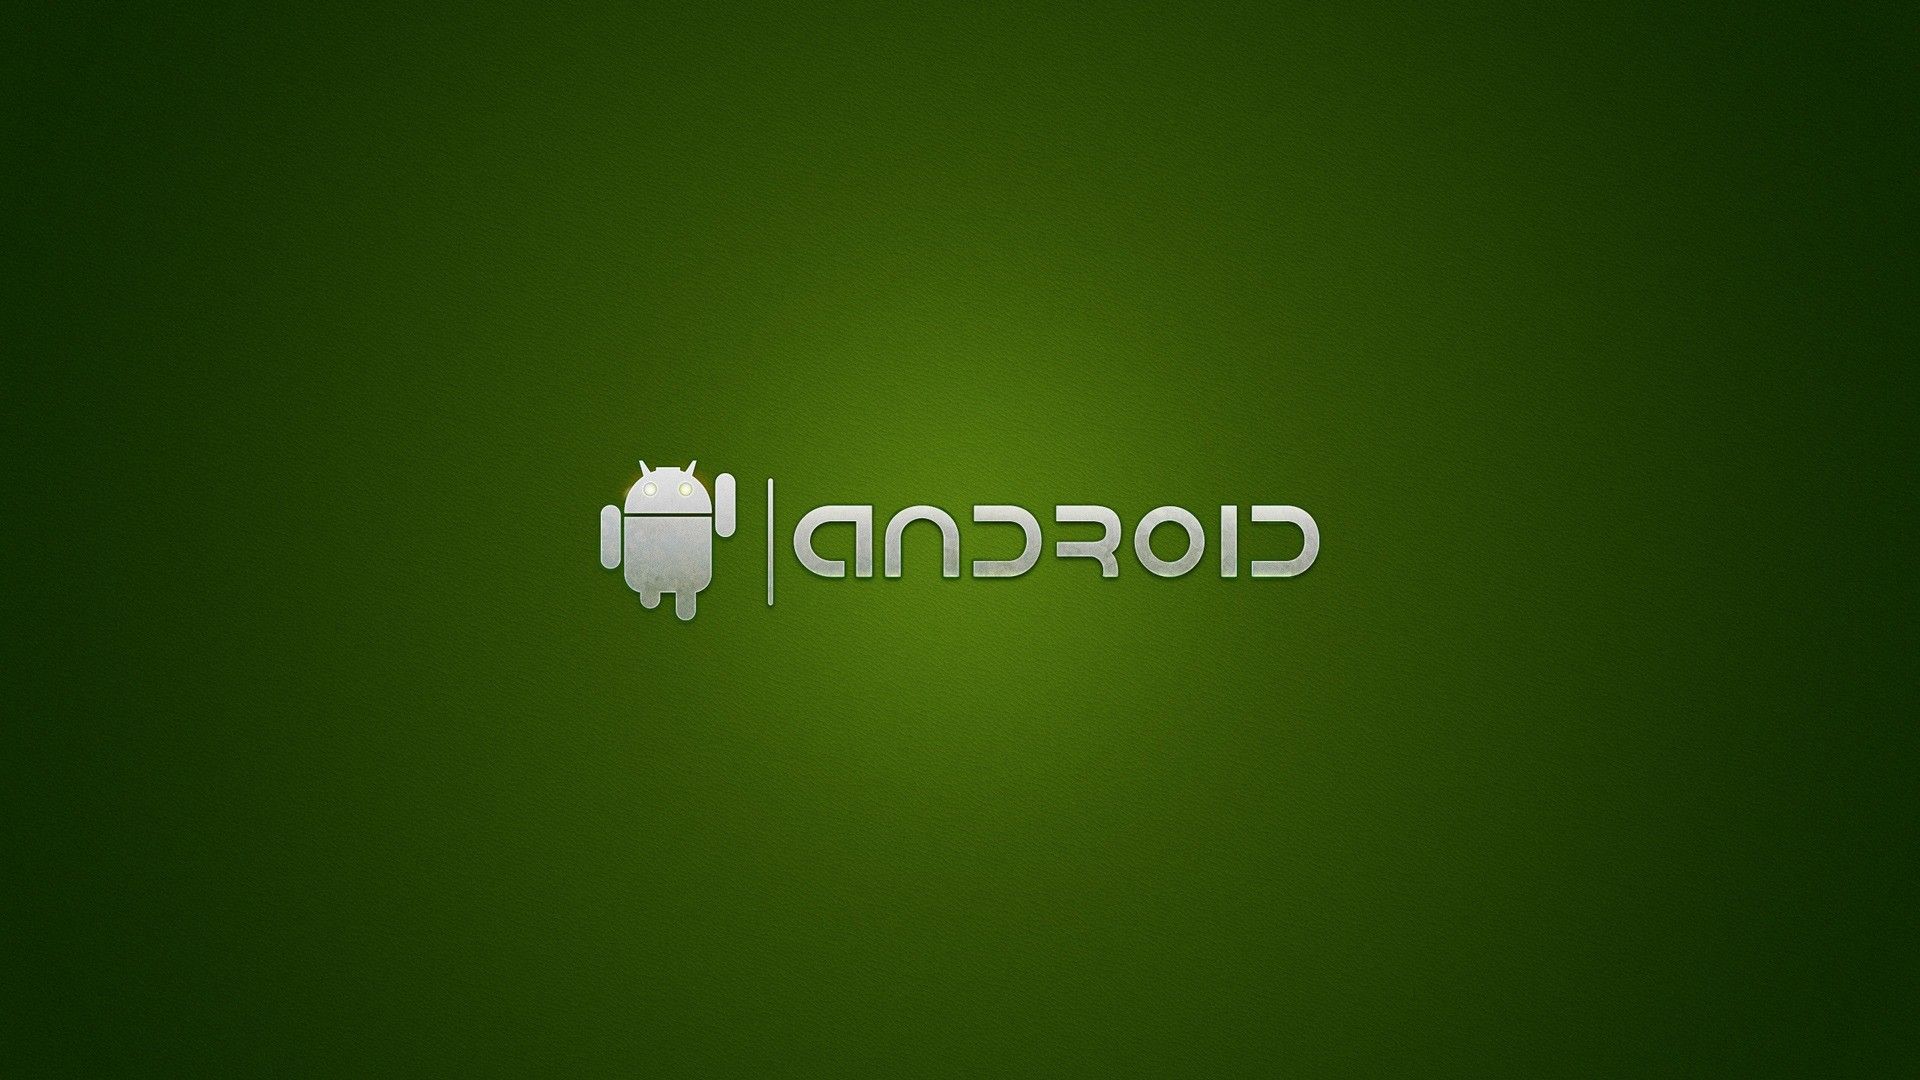 Android Logo Wallpaper (the best image in 2018)